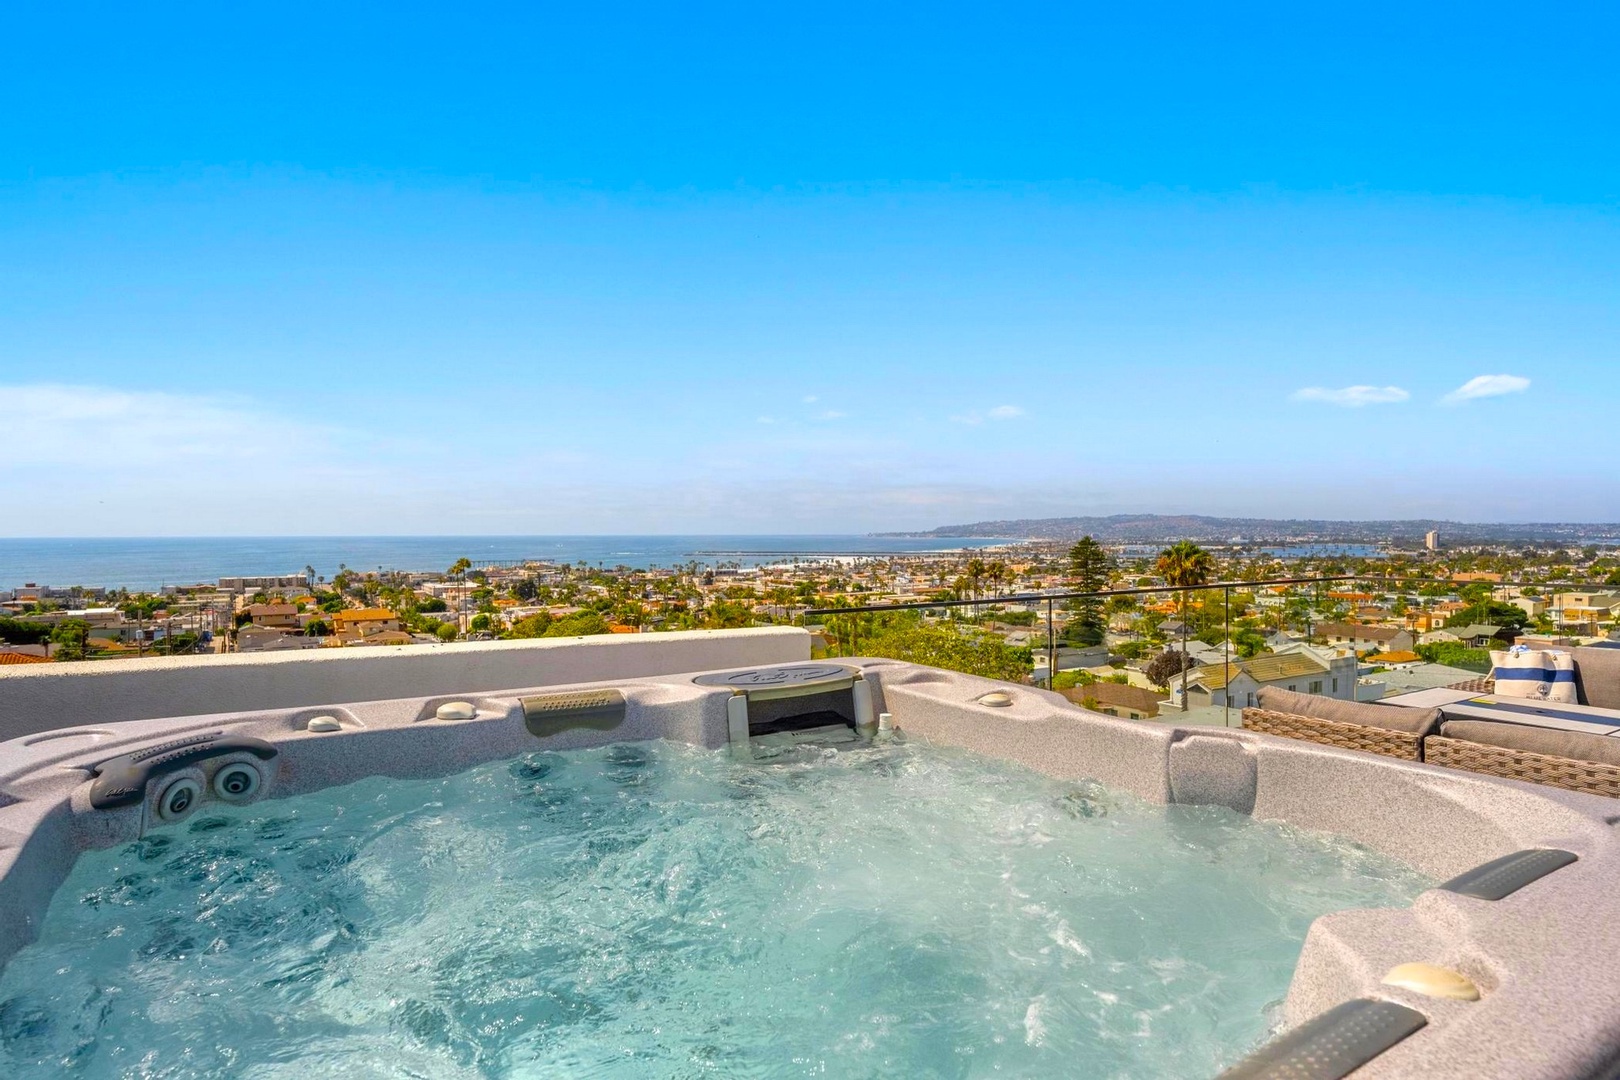 Amazing place to "soak in" the views!